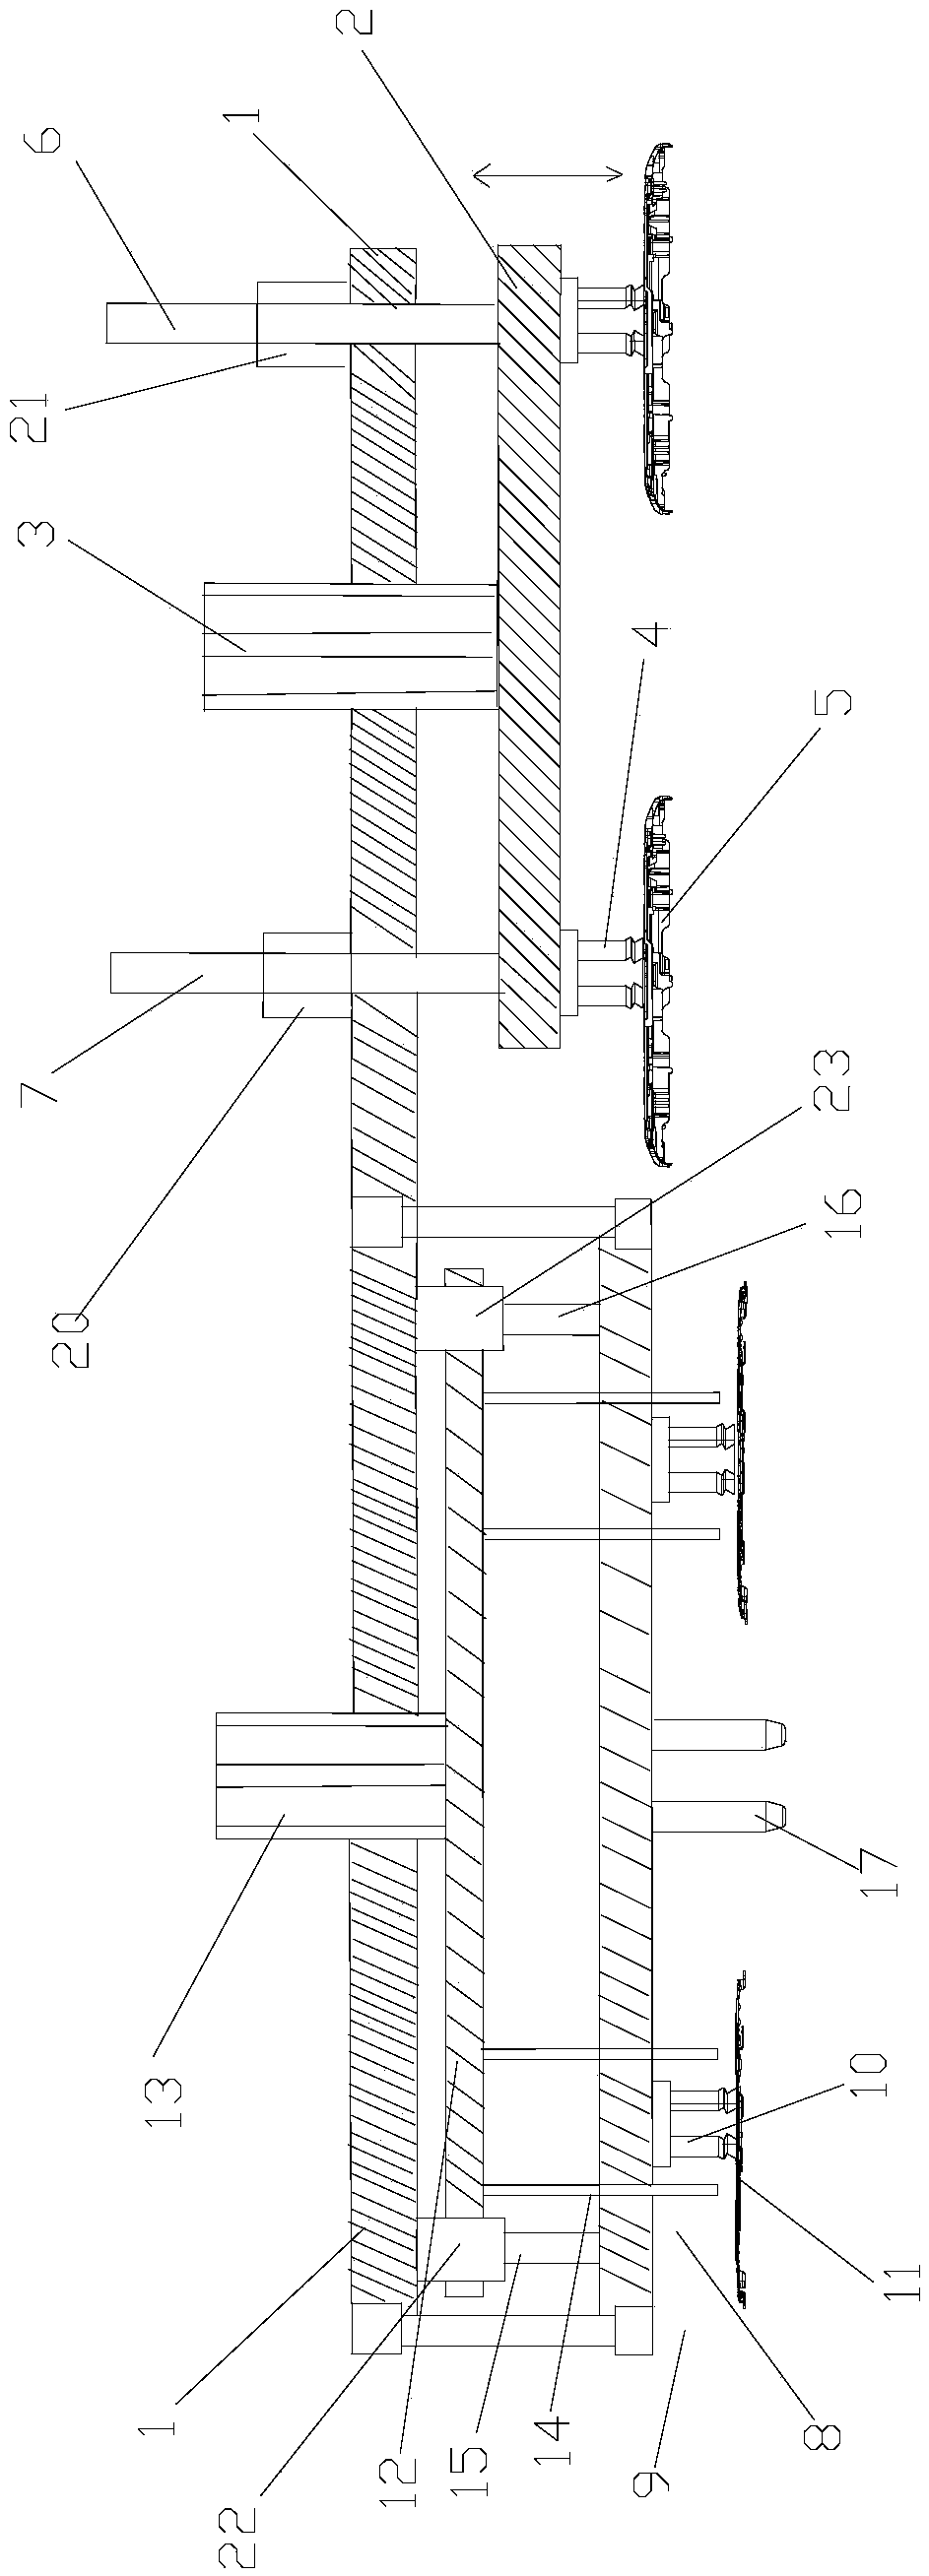 Multifunctional jig for metal implanting and product withdrawal